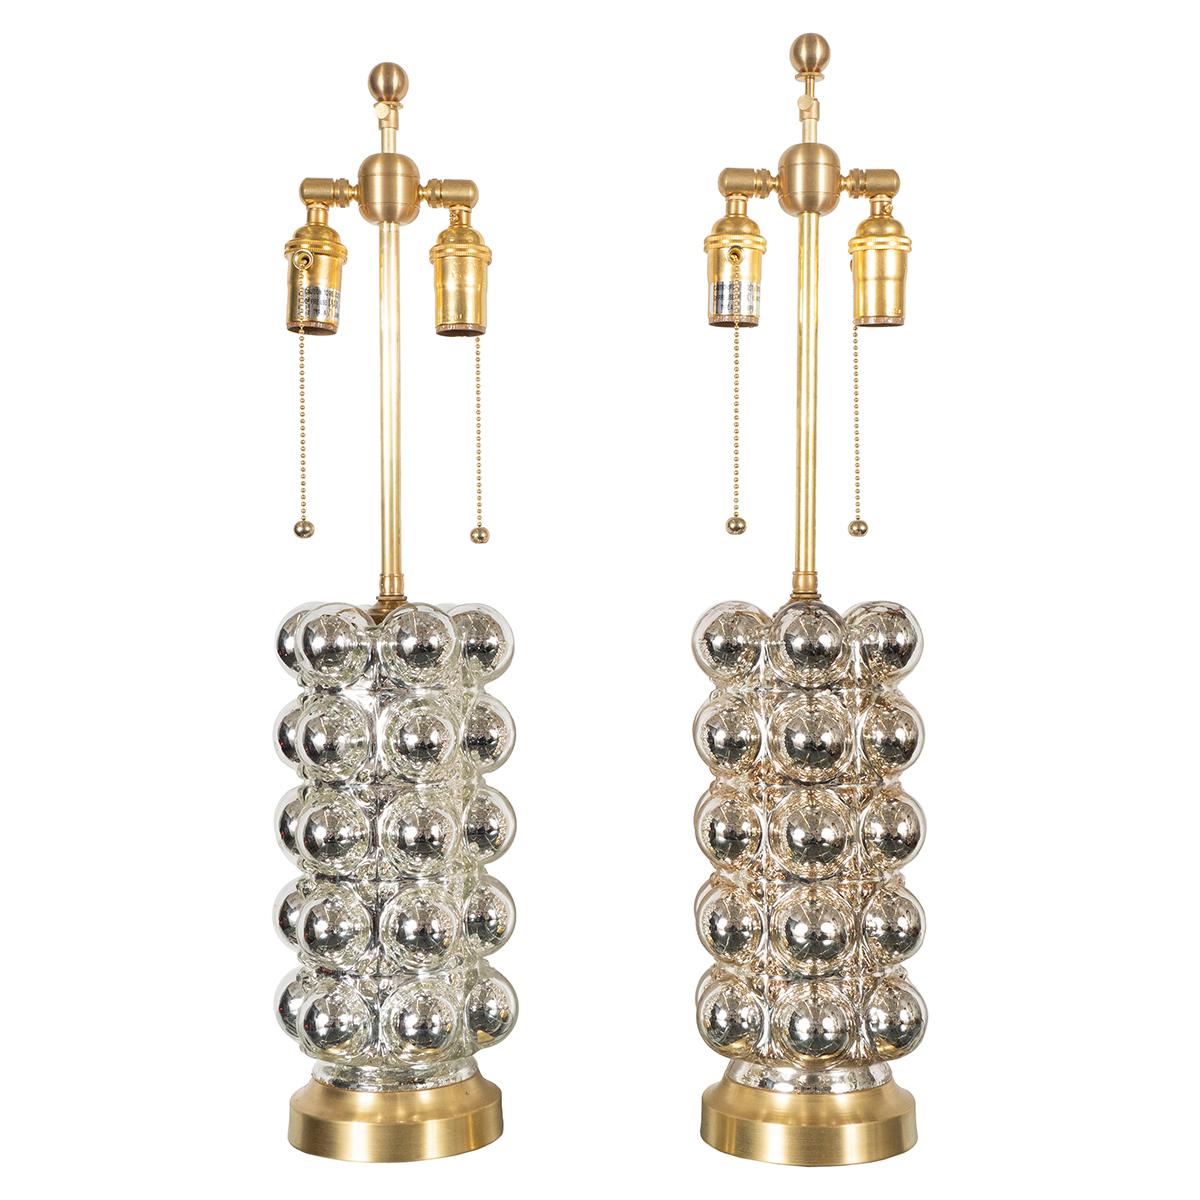 Pair of cylindrical lamps with mercury bubble glass body. Color varies slightly between pairs.